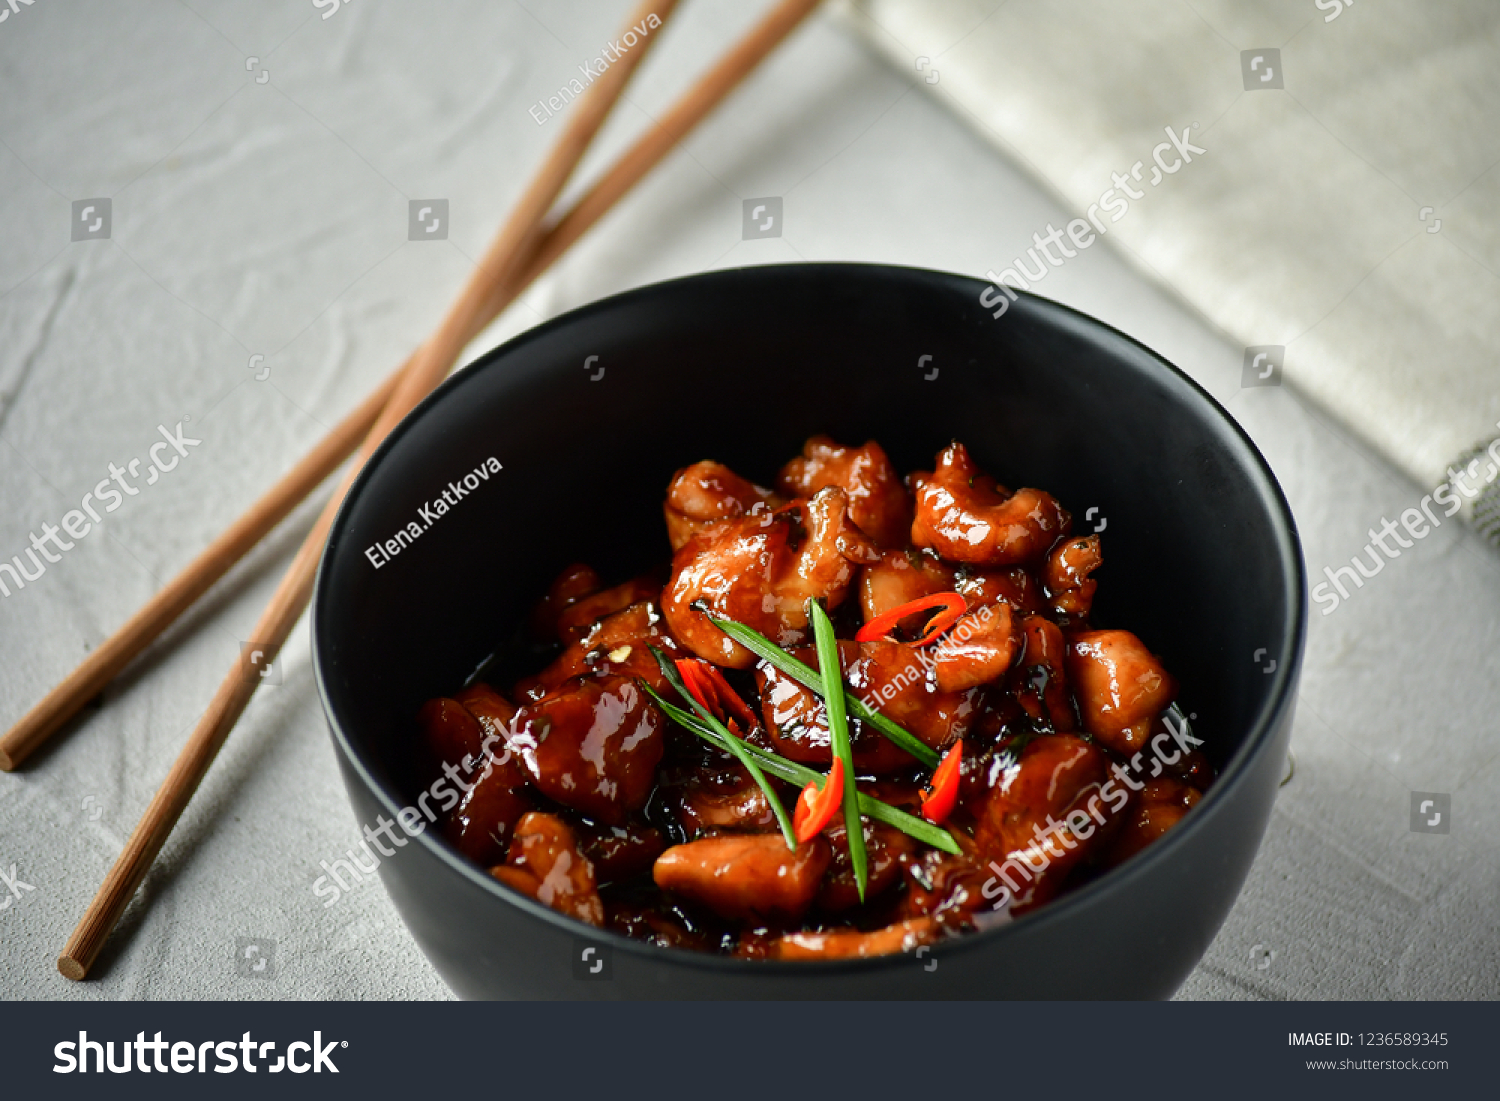 spicy chicken in sweet and sour sauce with chili pepper, Asian cuisine, Chinese cuisine, Thai cuisine, soy sauce #1236589345